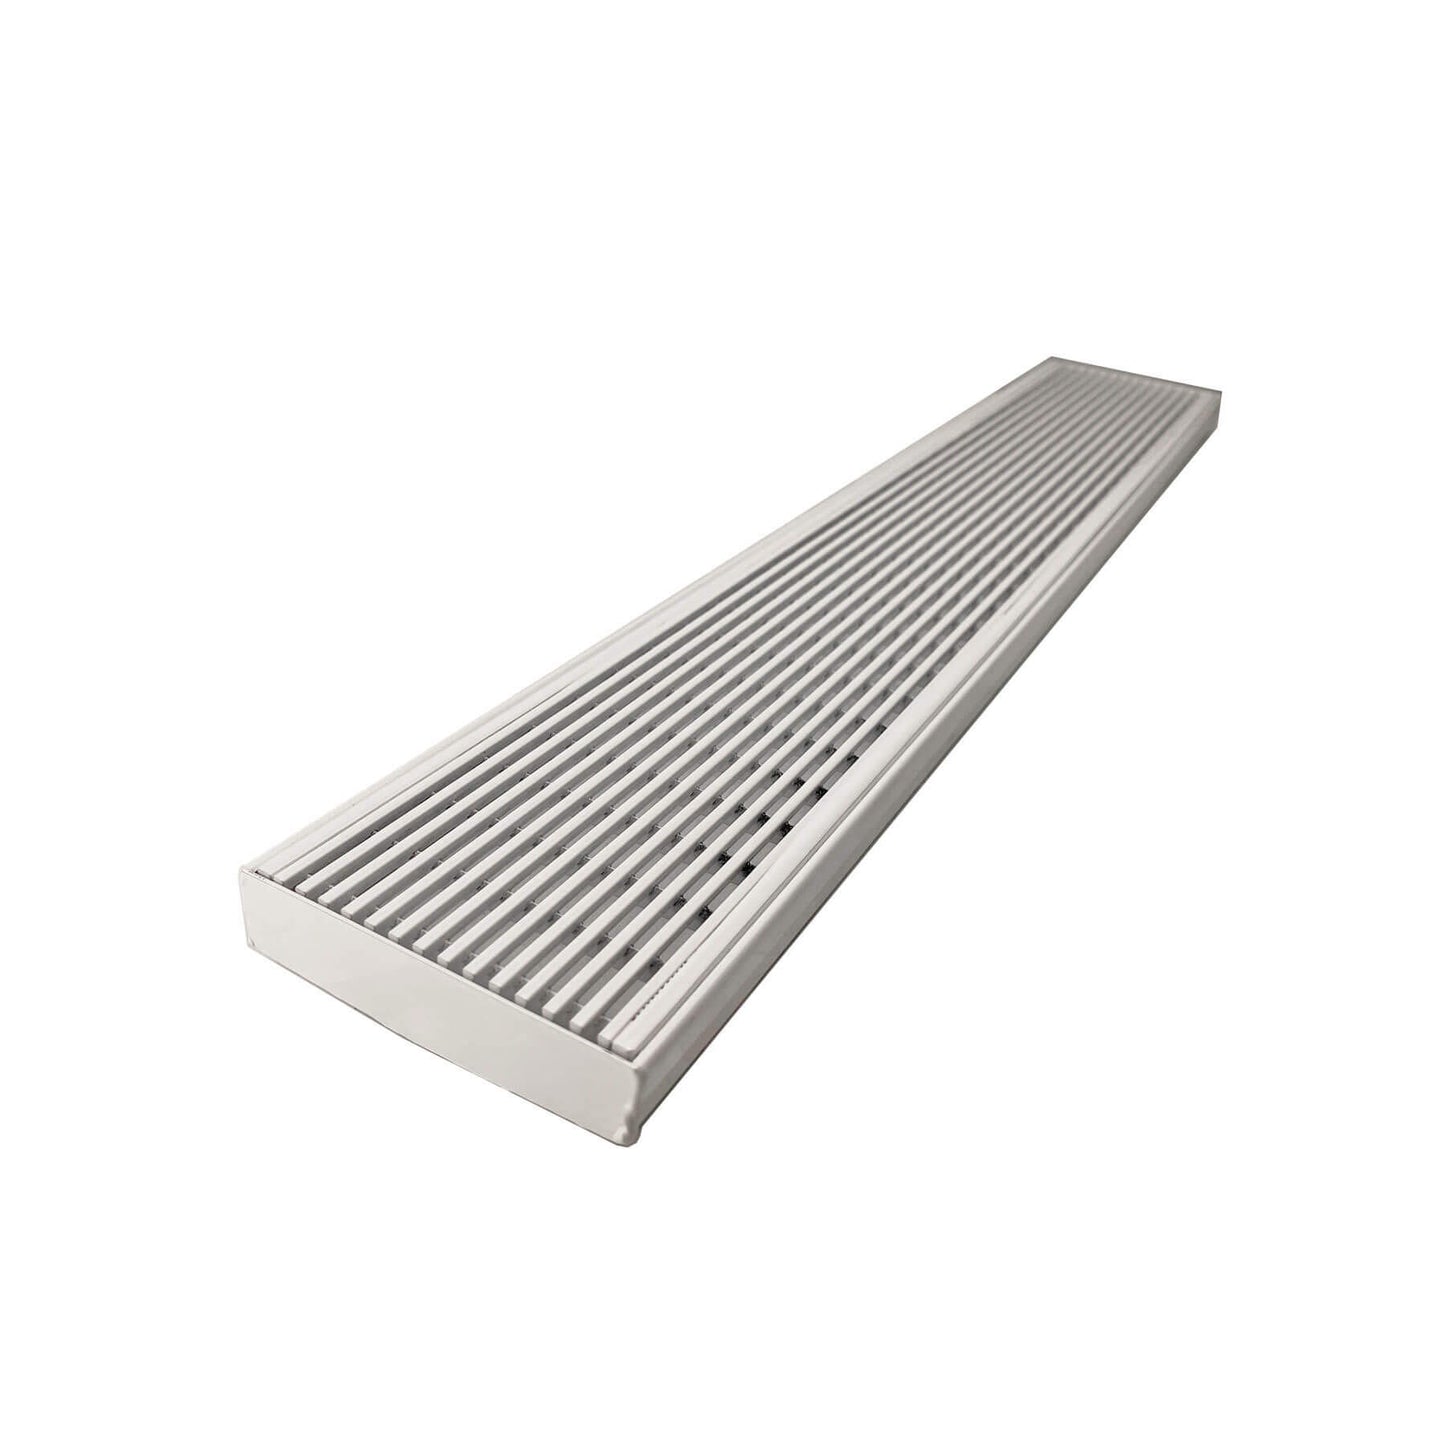 Wedge Wire Grate and Channel Drain - White